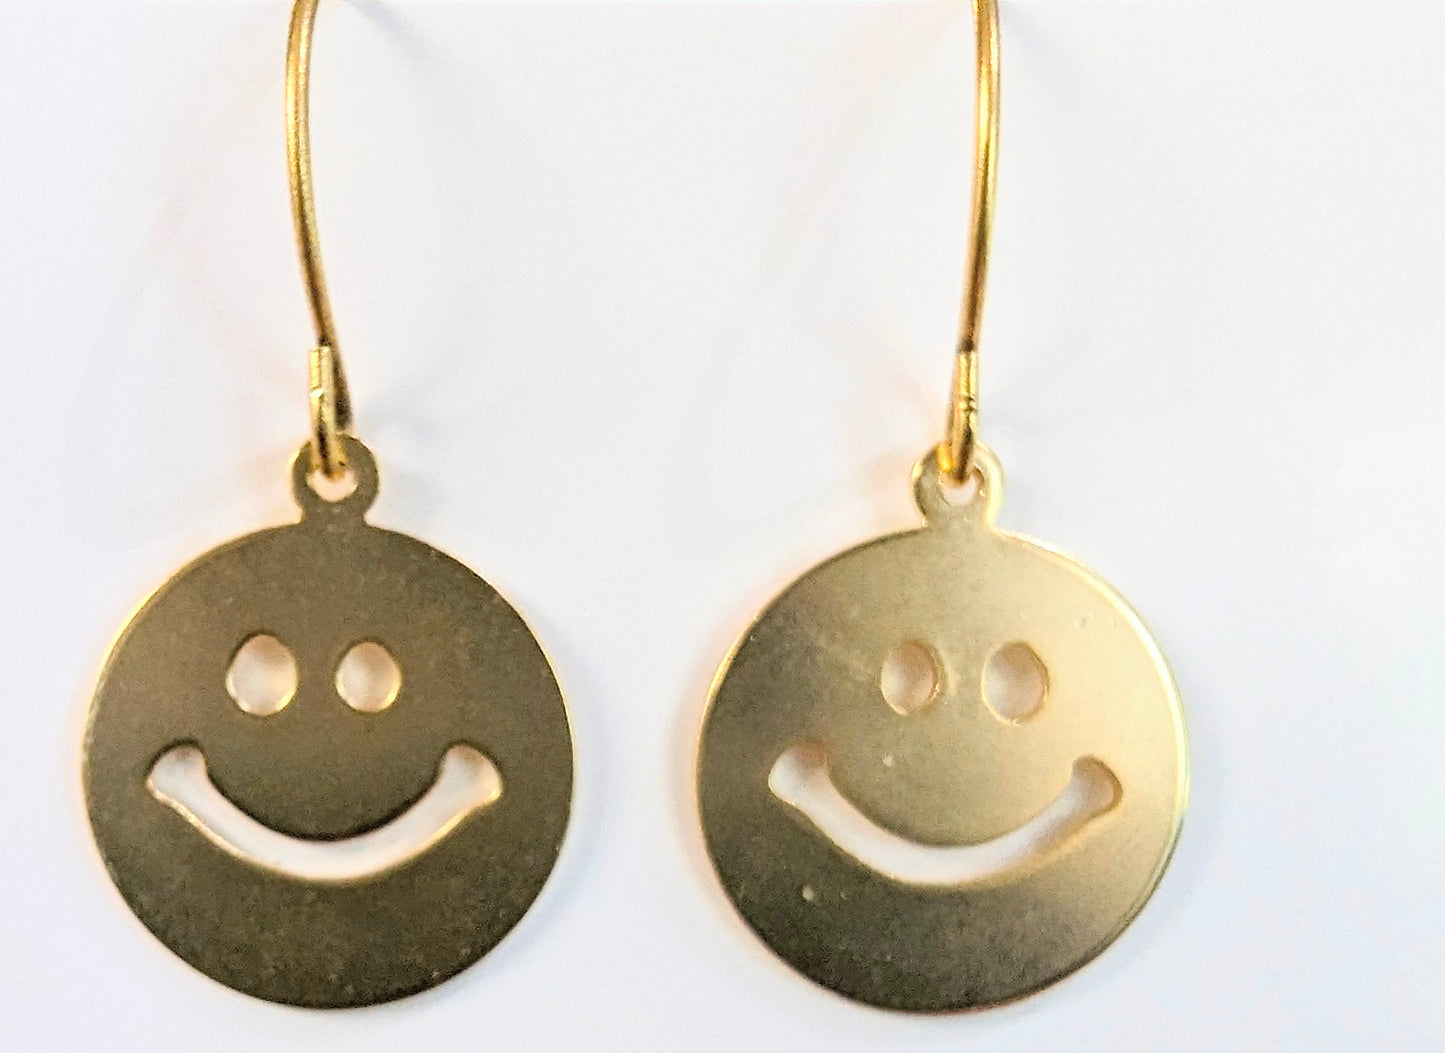 24k Gold Smile Earrings Plated 1.5 inch Long USA Made by Sugar Gay Isber unisex-adult Be Happy